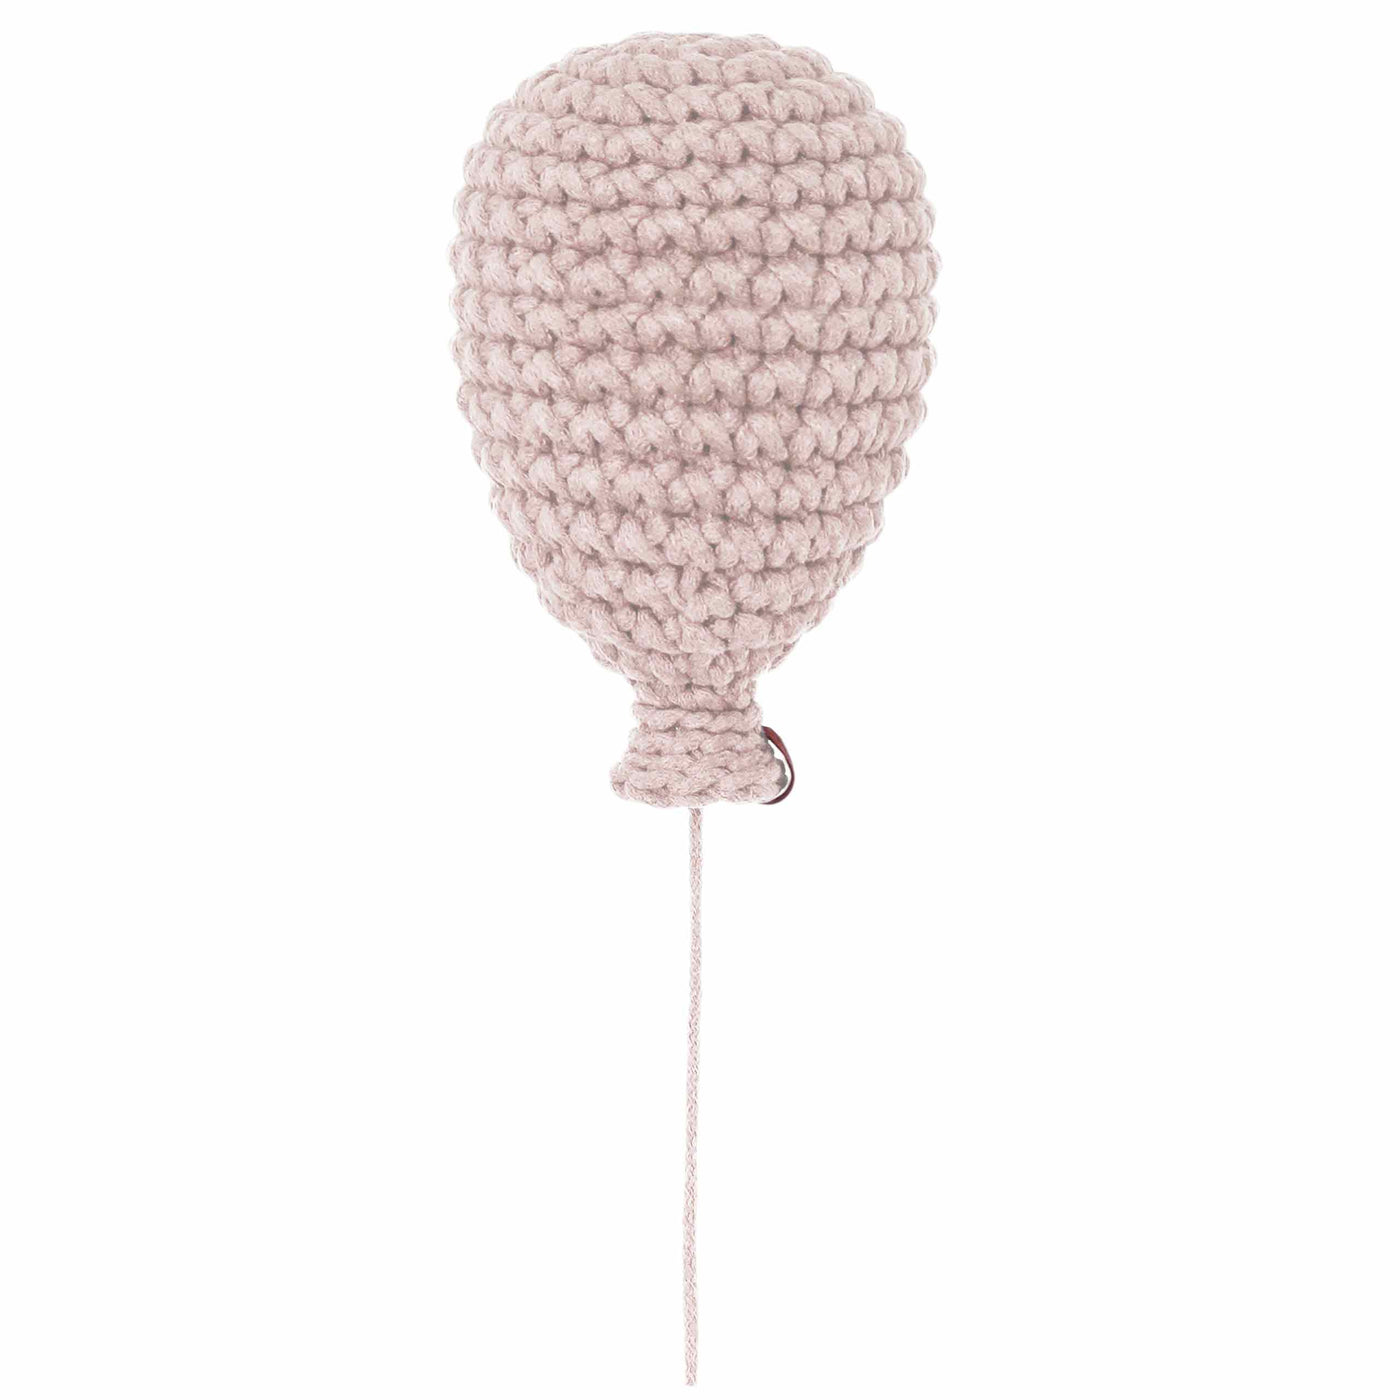 Crochet Balloon | Pale Pink-vendor-unknown-Yes Bebe